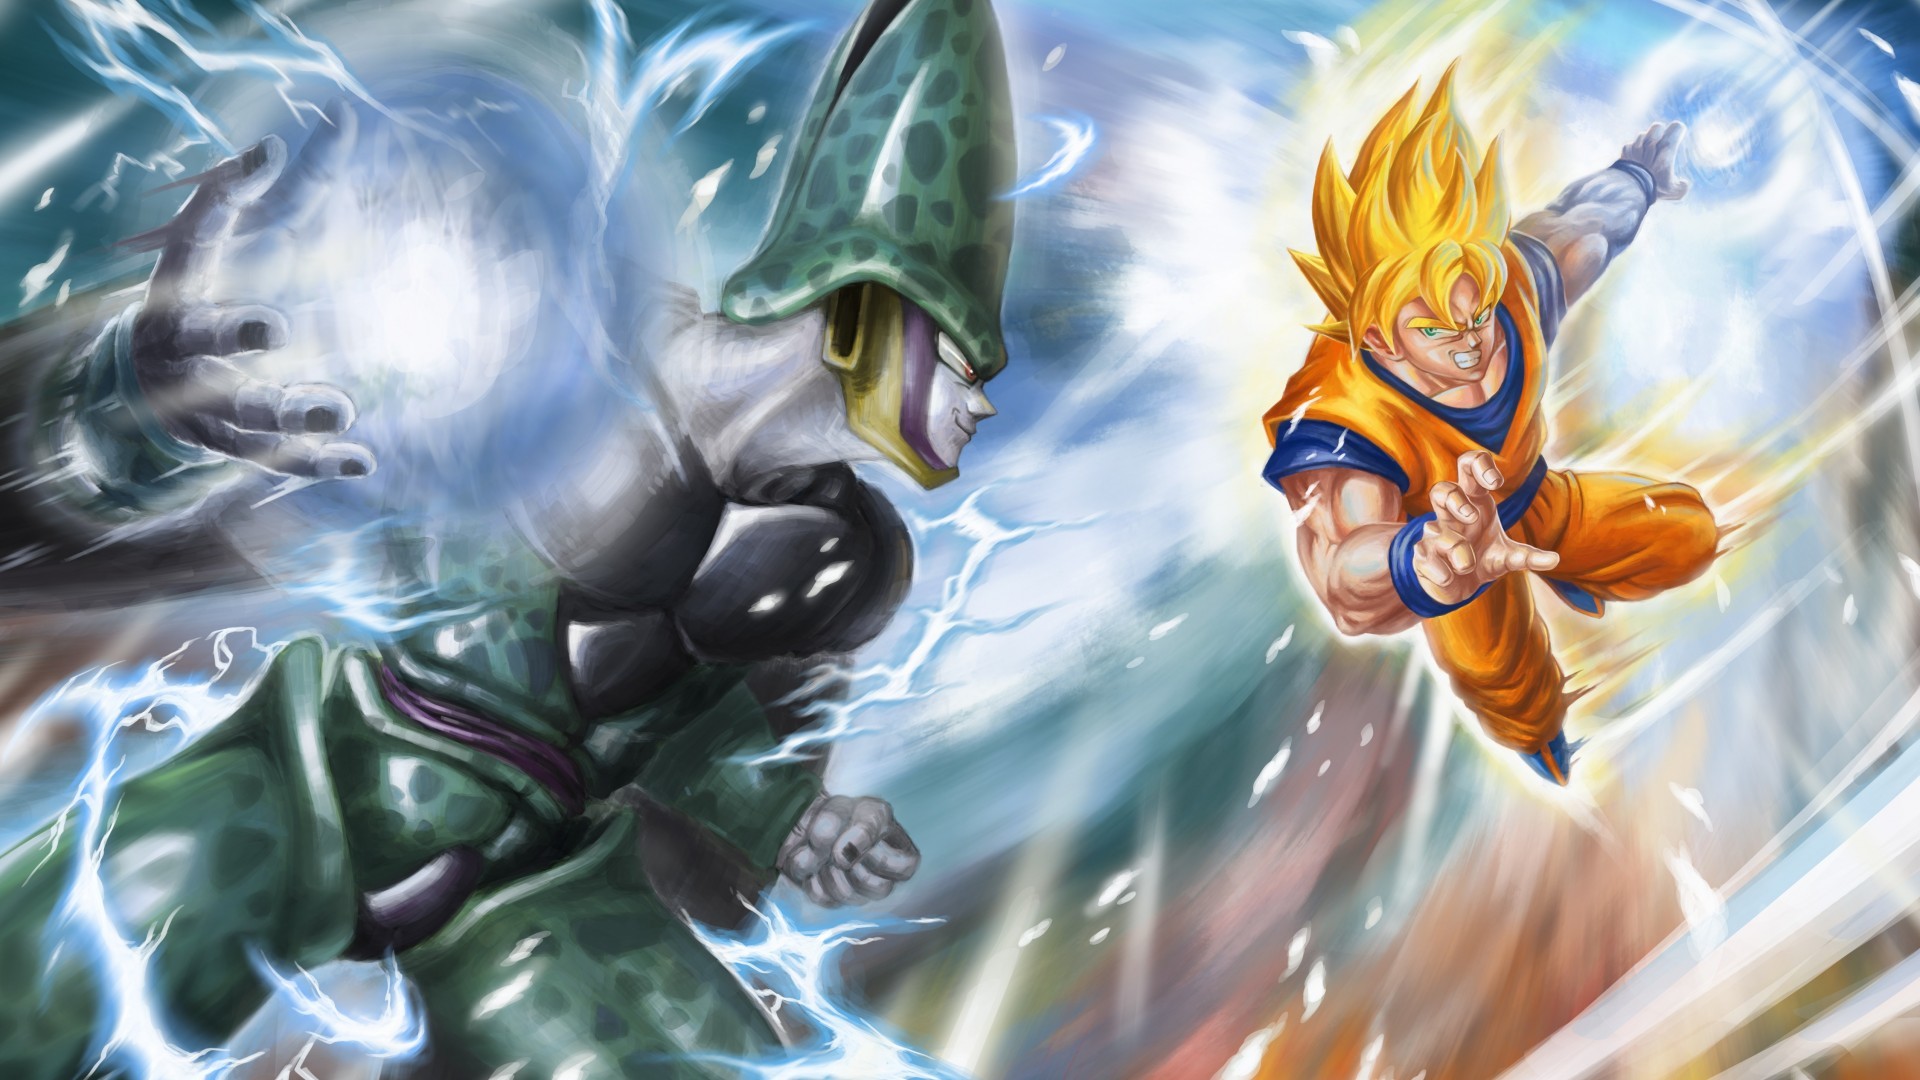 SSJ Goku vs Perfect Cell – Another well choreographed fight in Dbz. and the  shock of Goku forfeiting the match to Cell and passing the torch to Gohan.